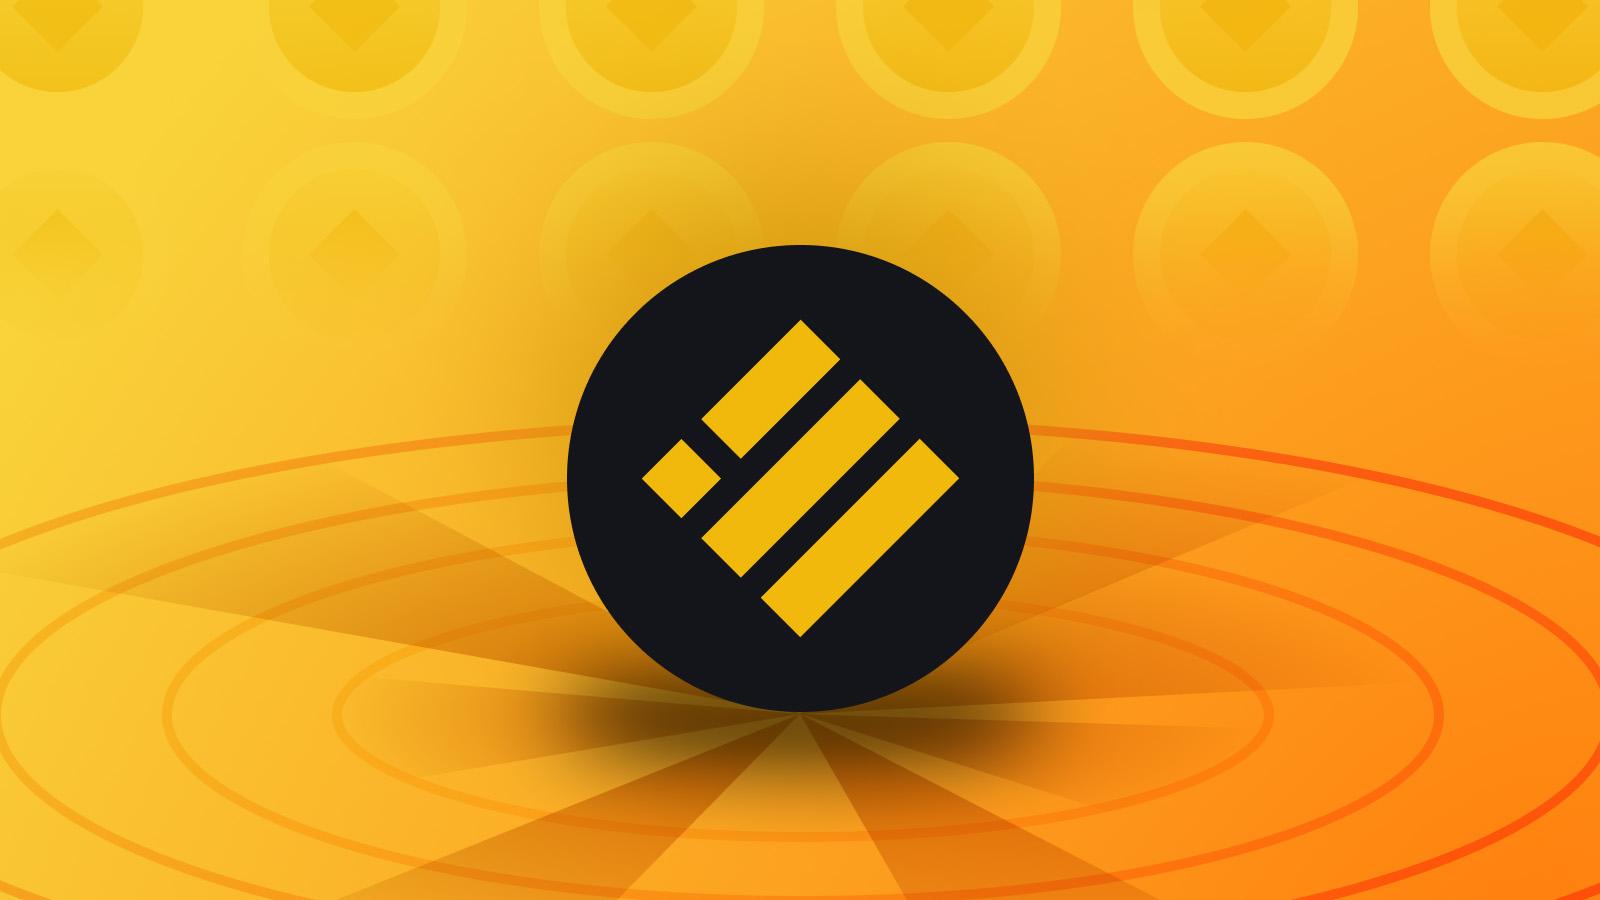 Binance USD (BUSD) is a stablecoin from the Binance exchange. How to use it?